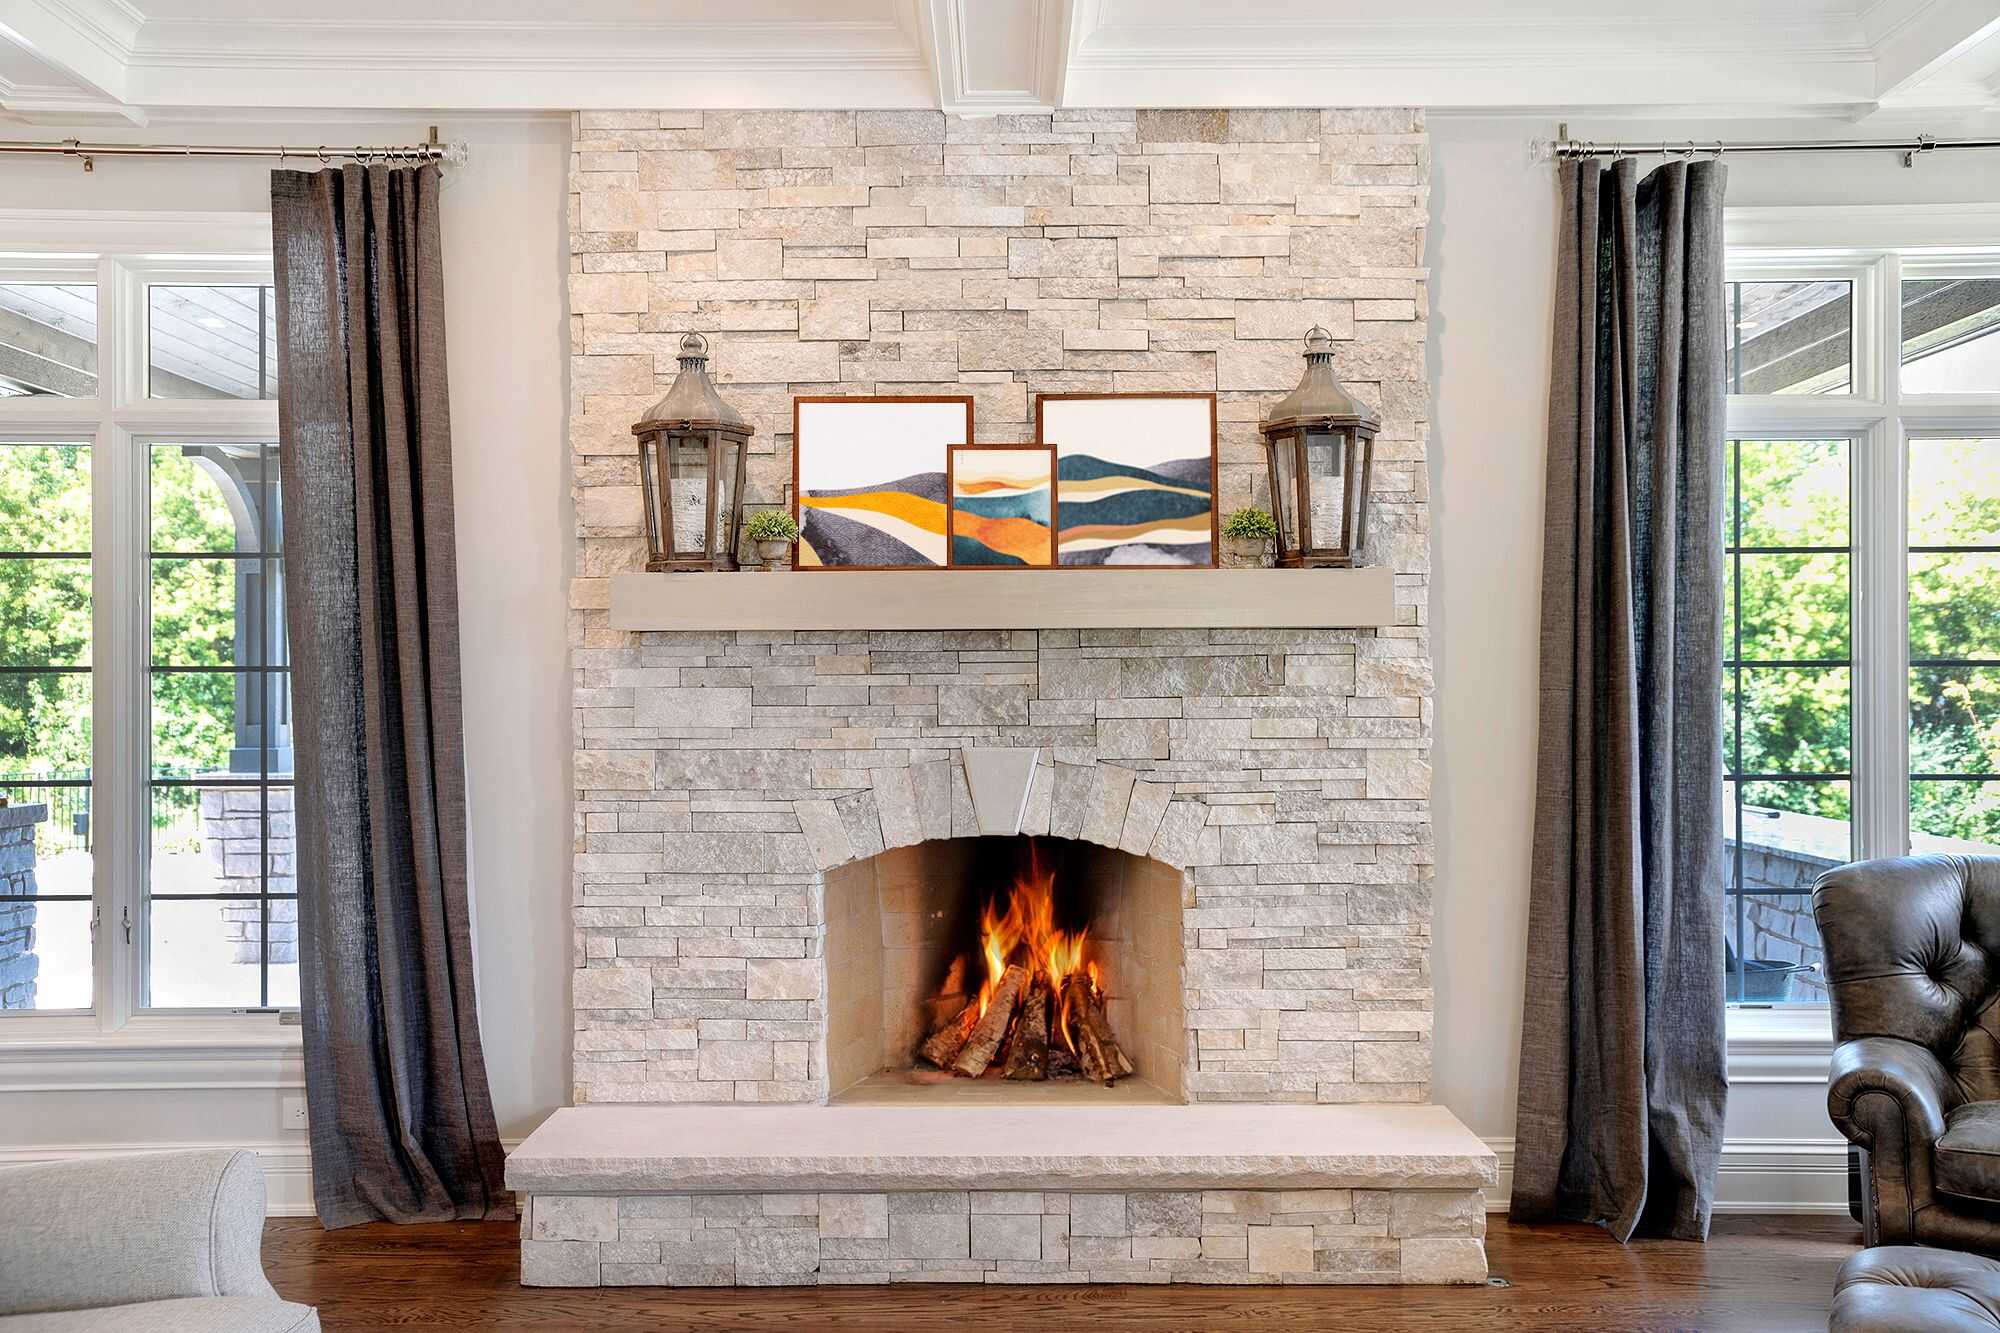 How To Build A Fireplace Chimney 1696225890 